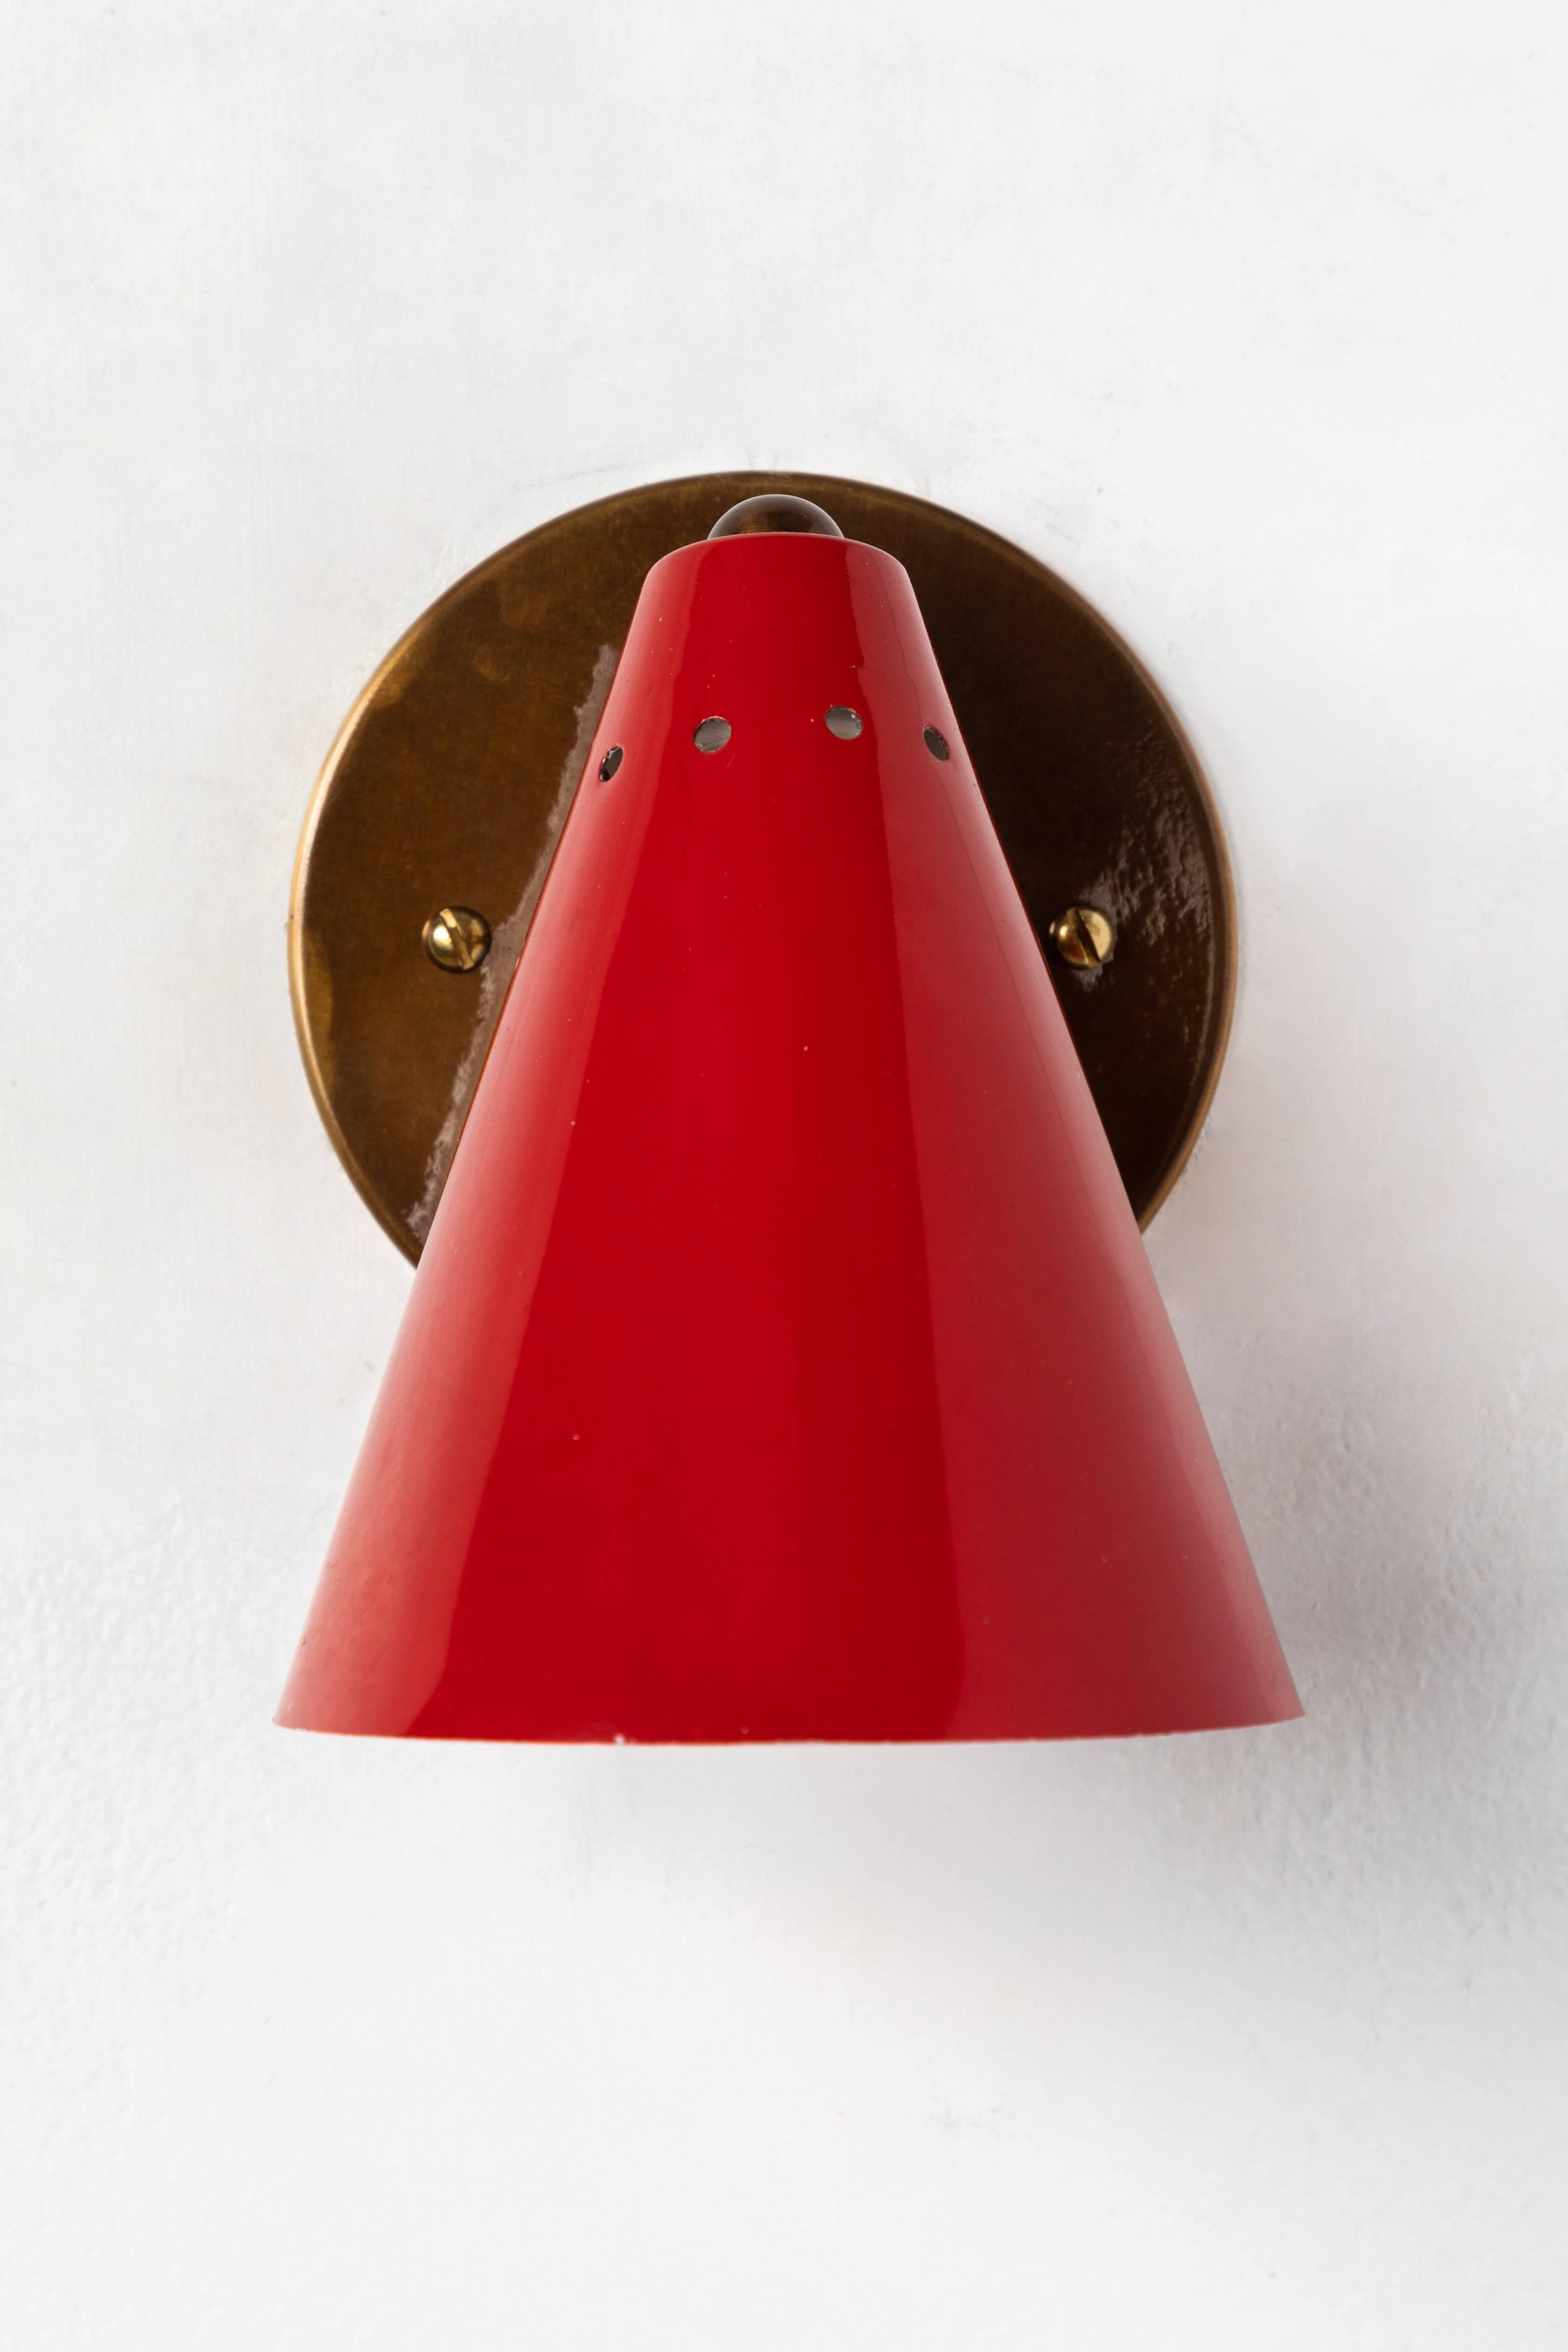 1950s Italian red cone sconces. Executed in enameled red metal and patinated brass. Shades adjustable. A very clean and simple Italian midcentury design reminiscent of the output of Arteluce and Stilnovo.

Price is per item. Six lamps